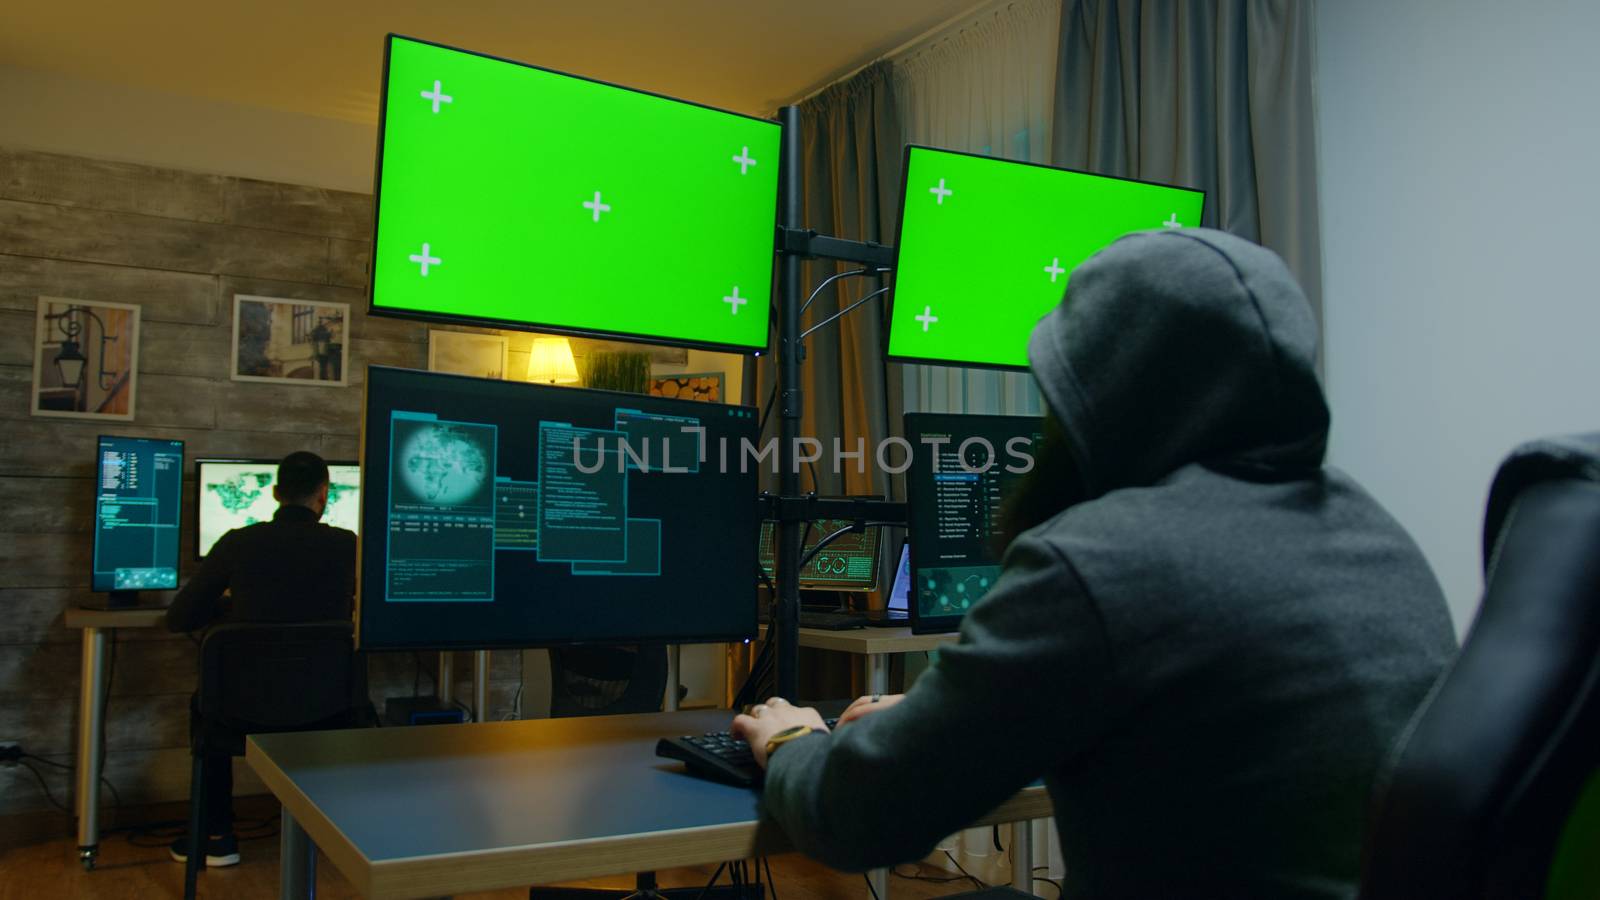 Hacker with a hoodies making a dangerous malware by DCStudio